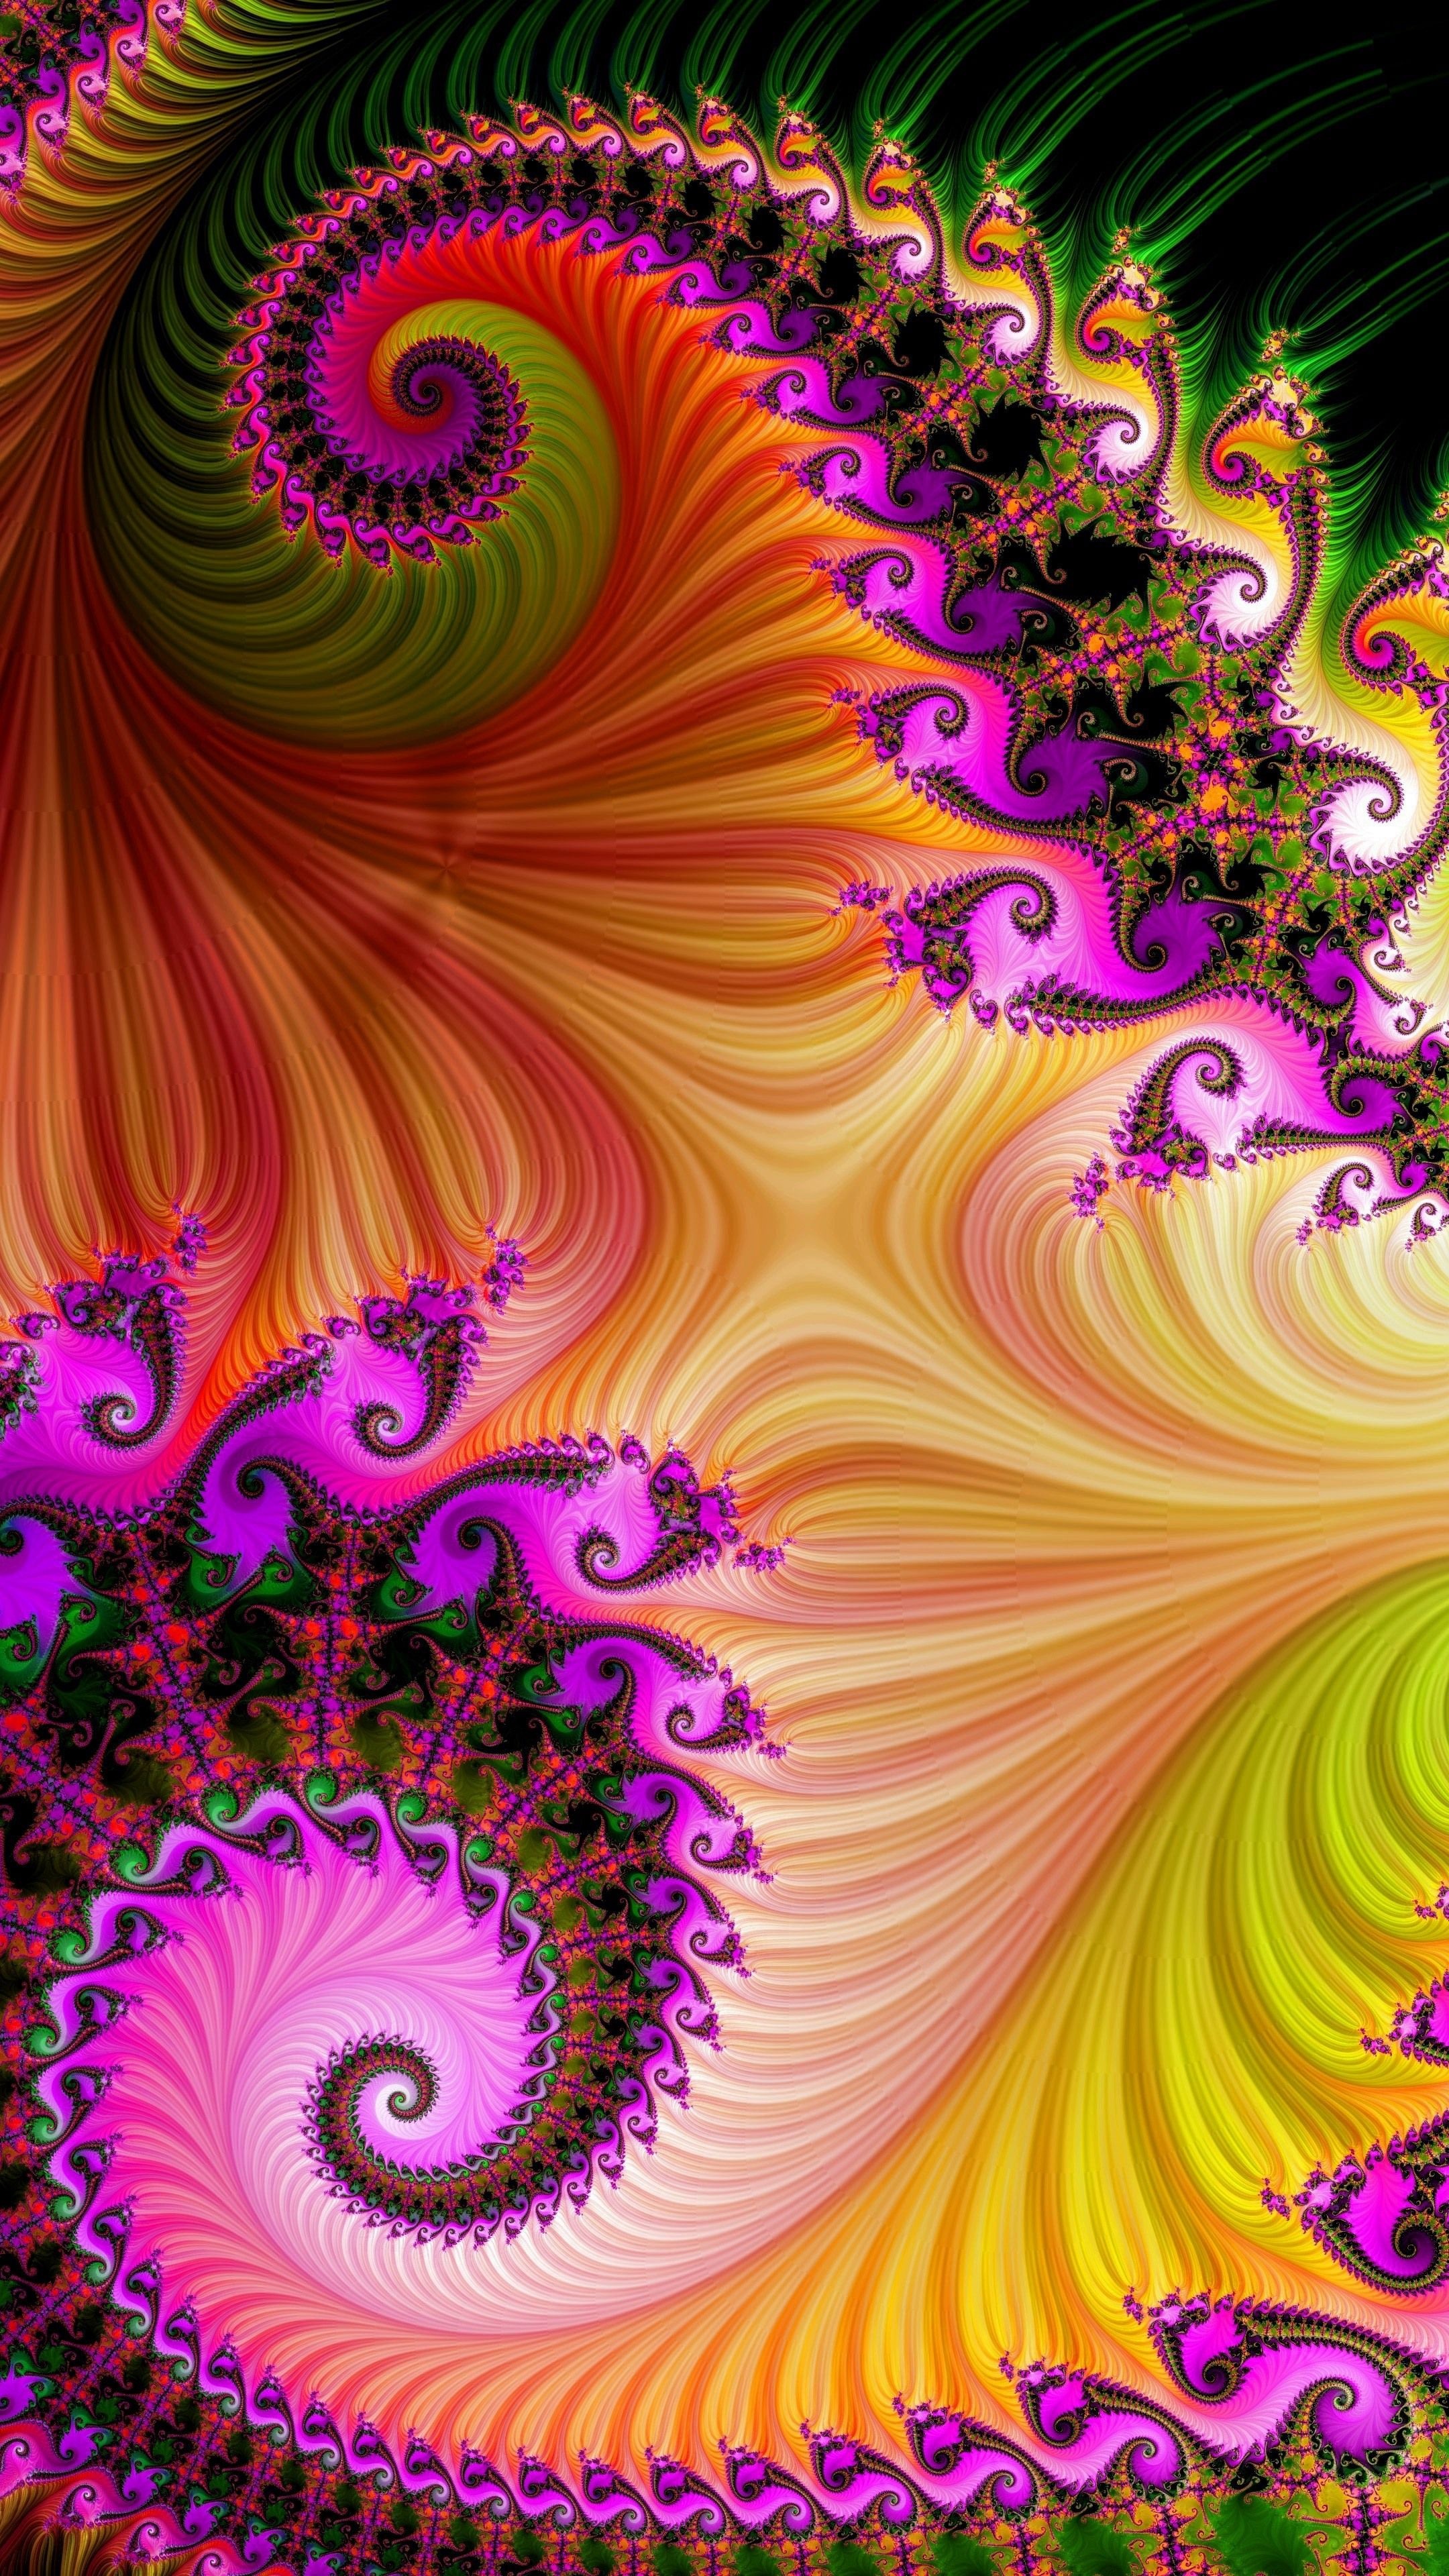 Fractals in 2022, Illusion paintings, Abstract art, Fractal art, 2160x3840 4K Handy